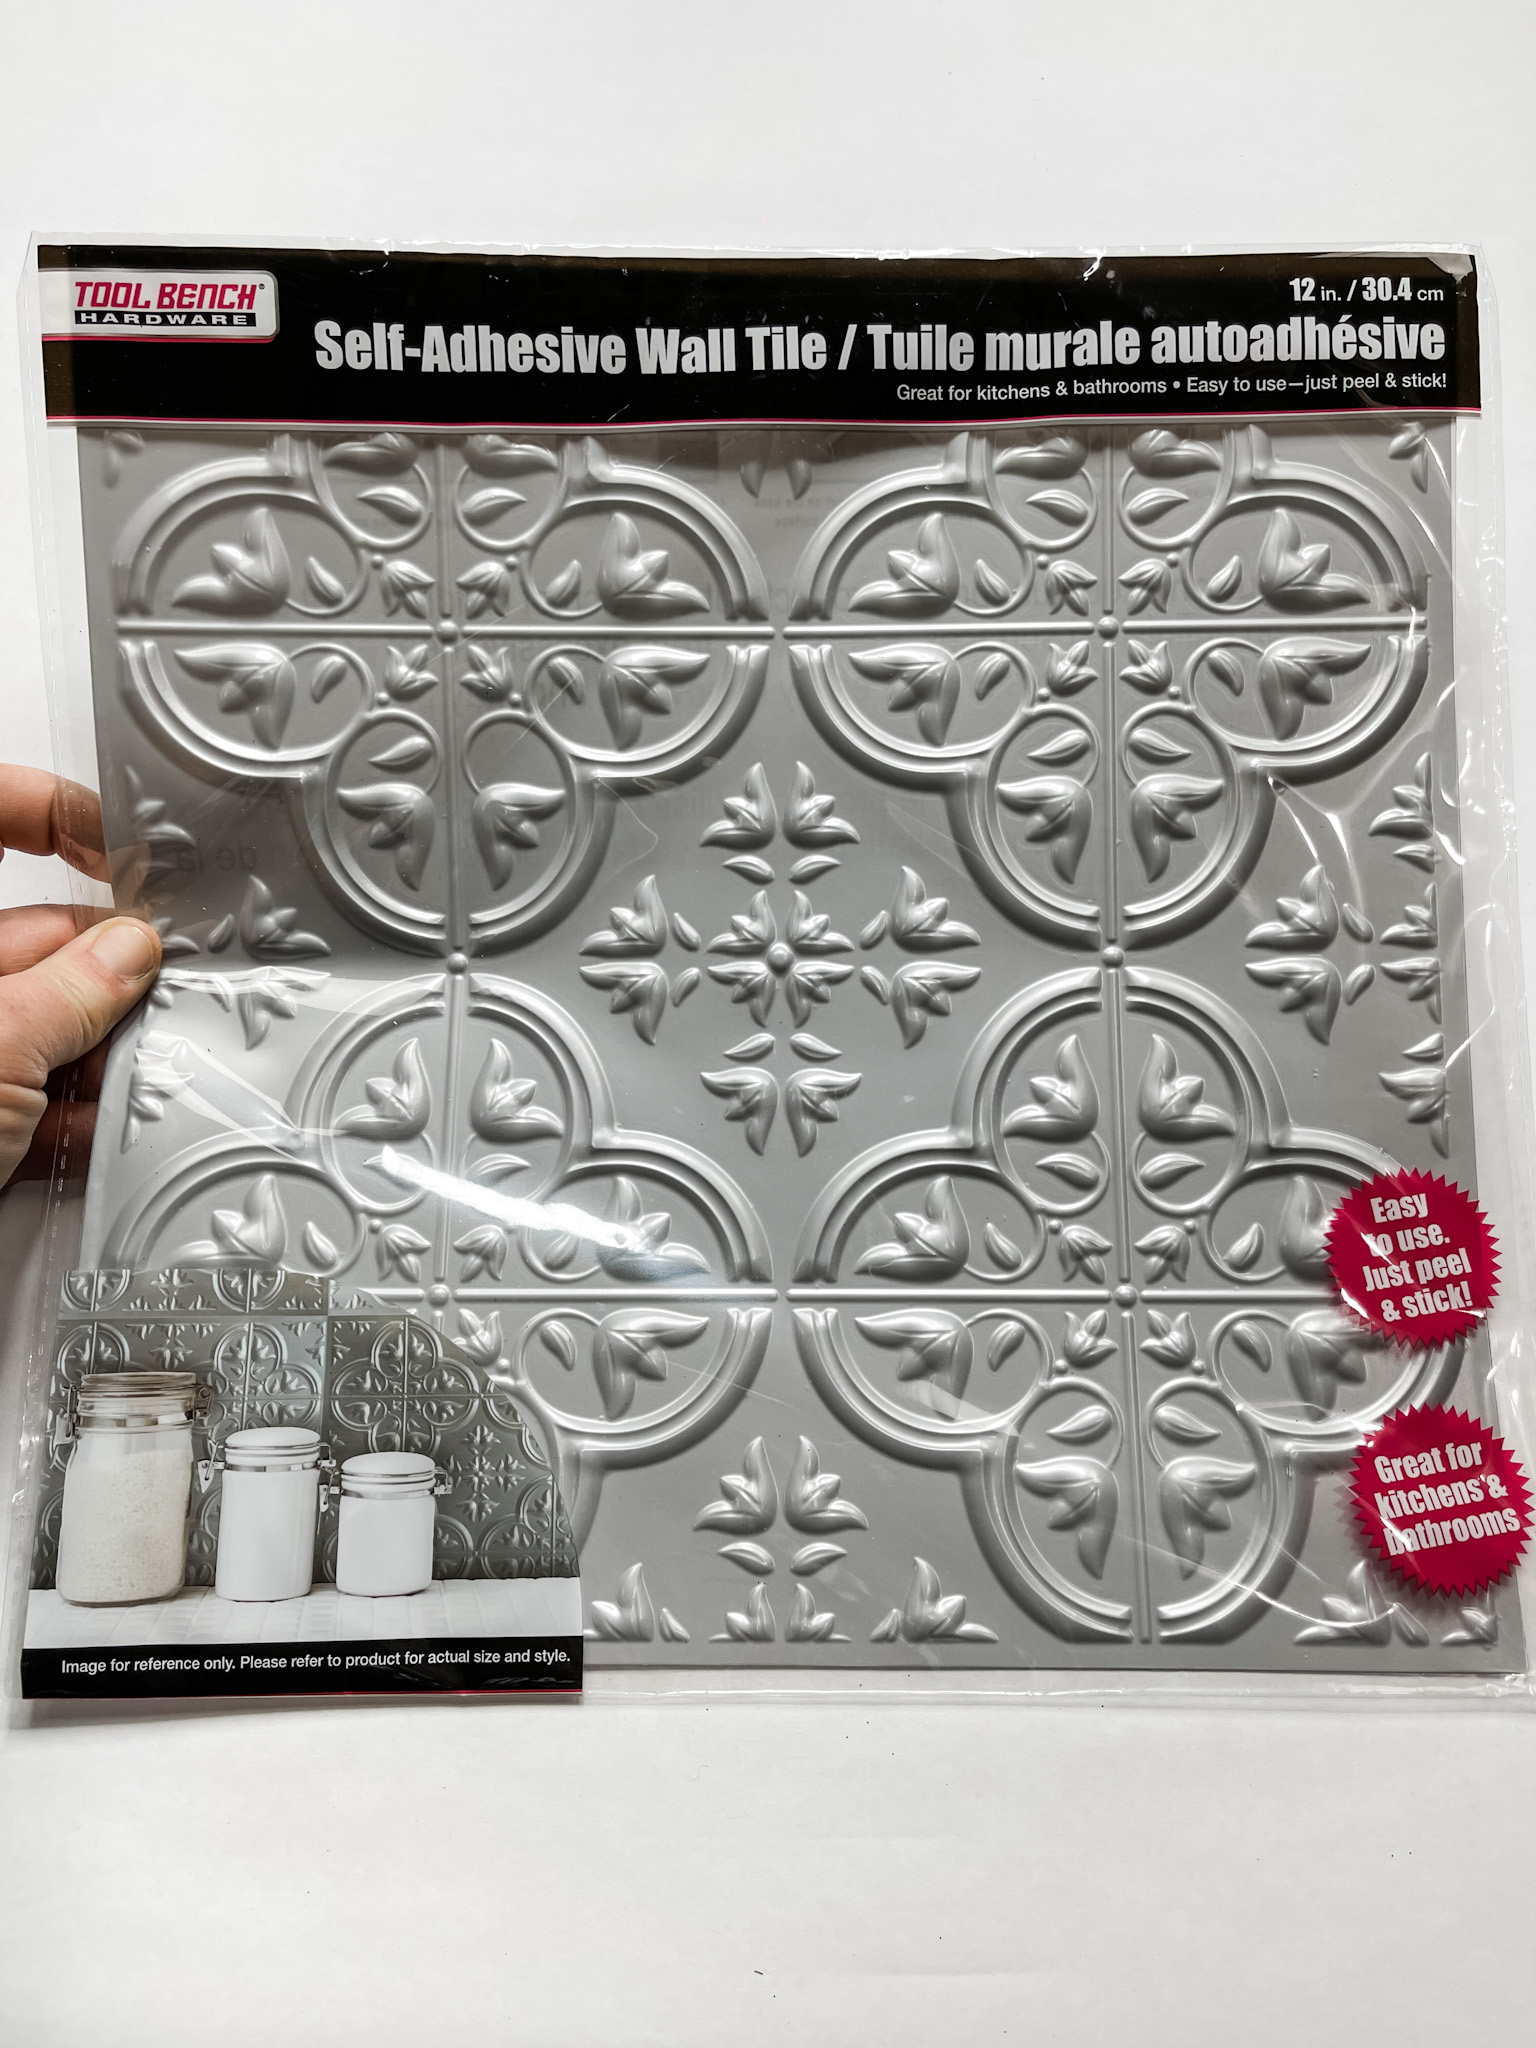 Simple Patriotic Home Decor with Dollar Tree's Adhesive Wall Tile